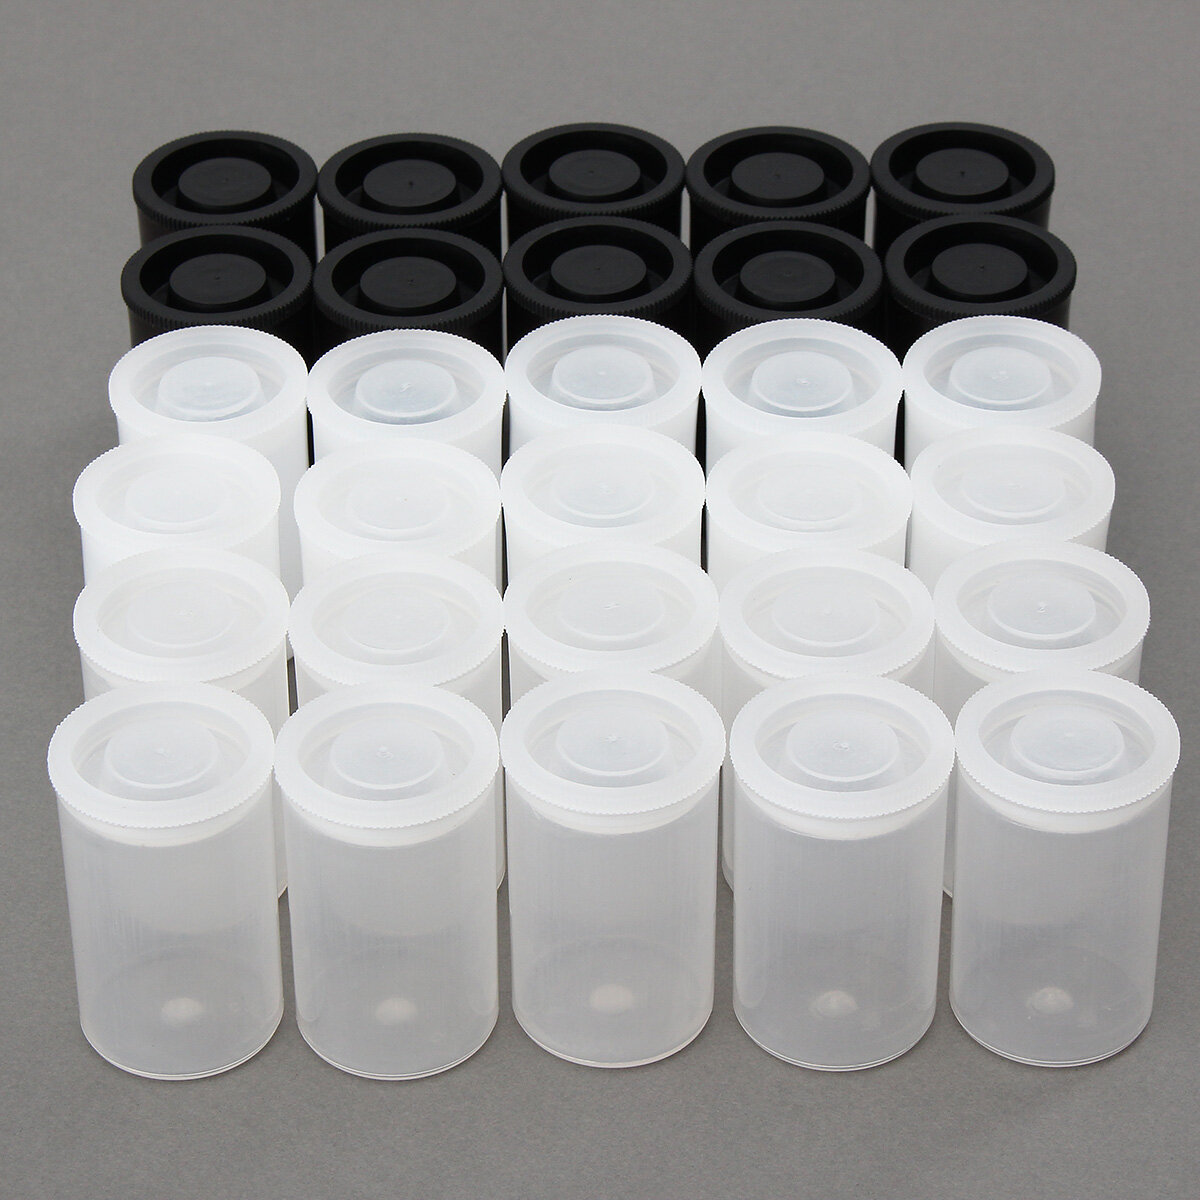 10Pcs Empty Black White Bottle 35mm Film Cans Canisters Containers for Kodak Fuji